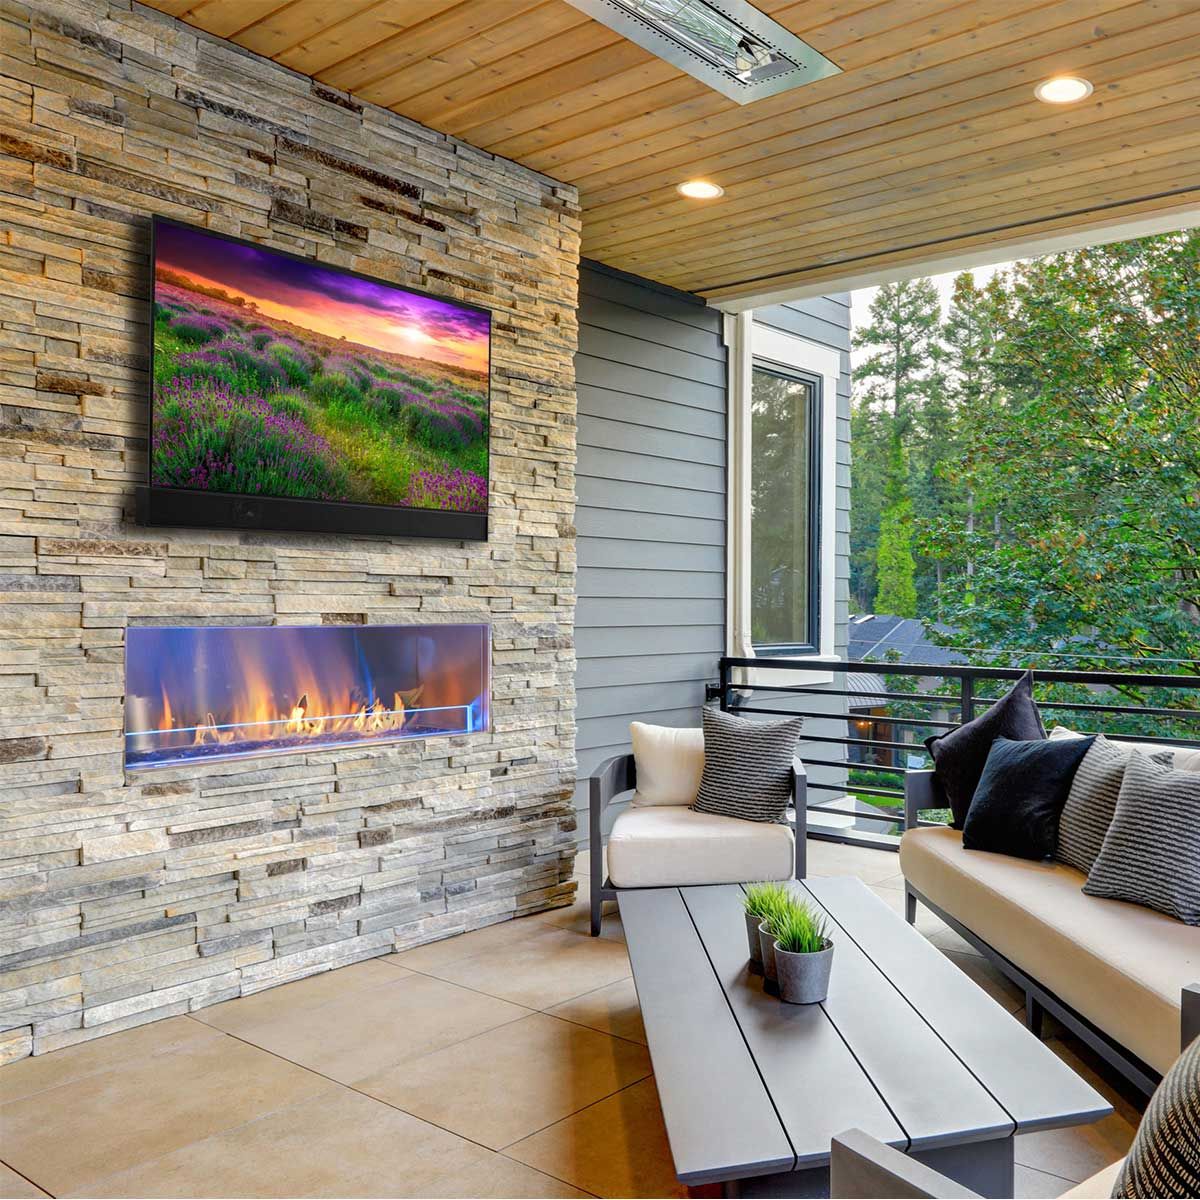 Séura Shade Series 2 4K UHD Outdoor TV, wall-mounted above a fireplace on a patio